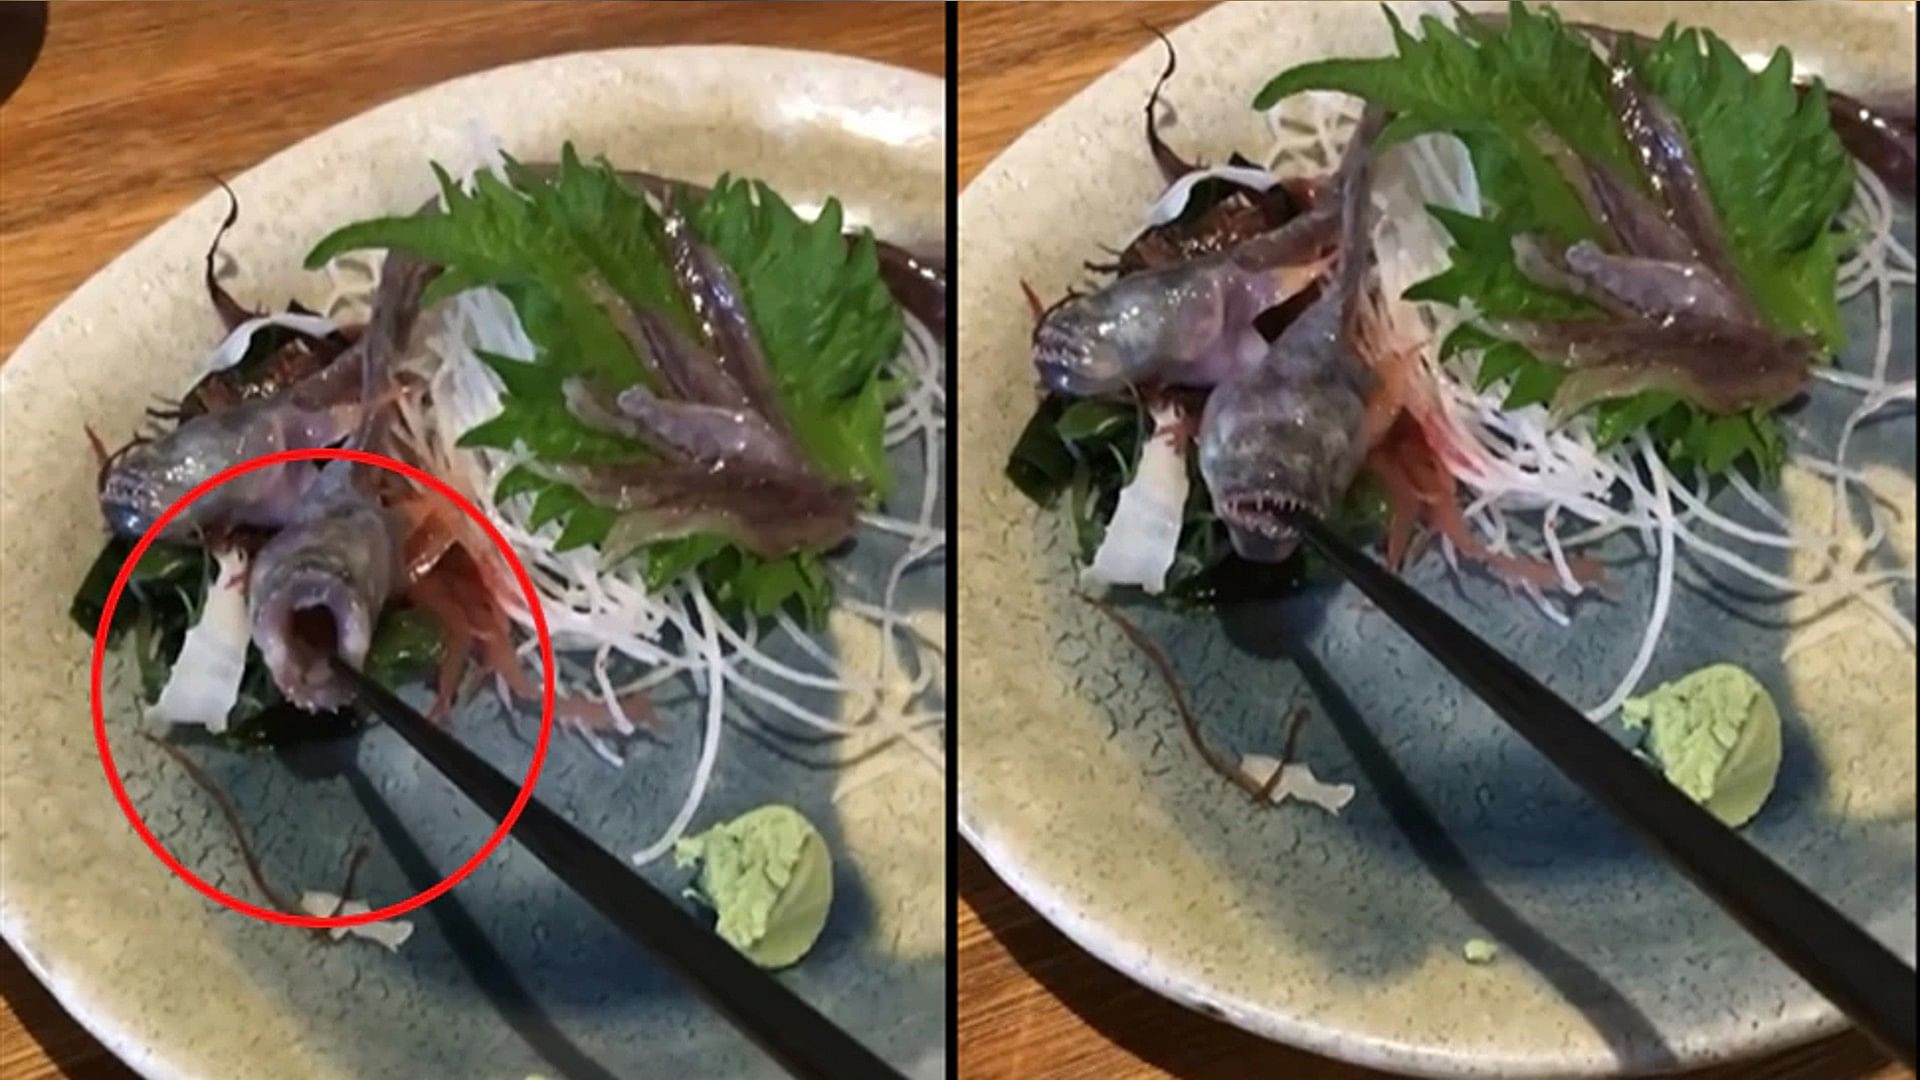 waiter served live fish in the restaurant to eat the fish opened its mouth as soon as it started eating